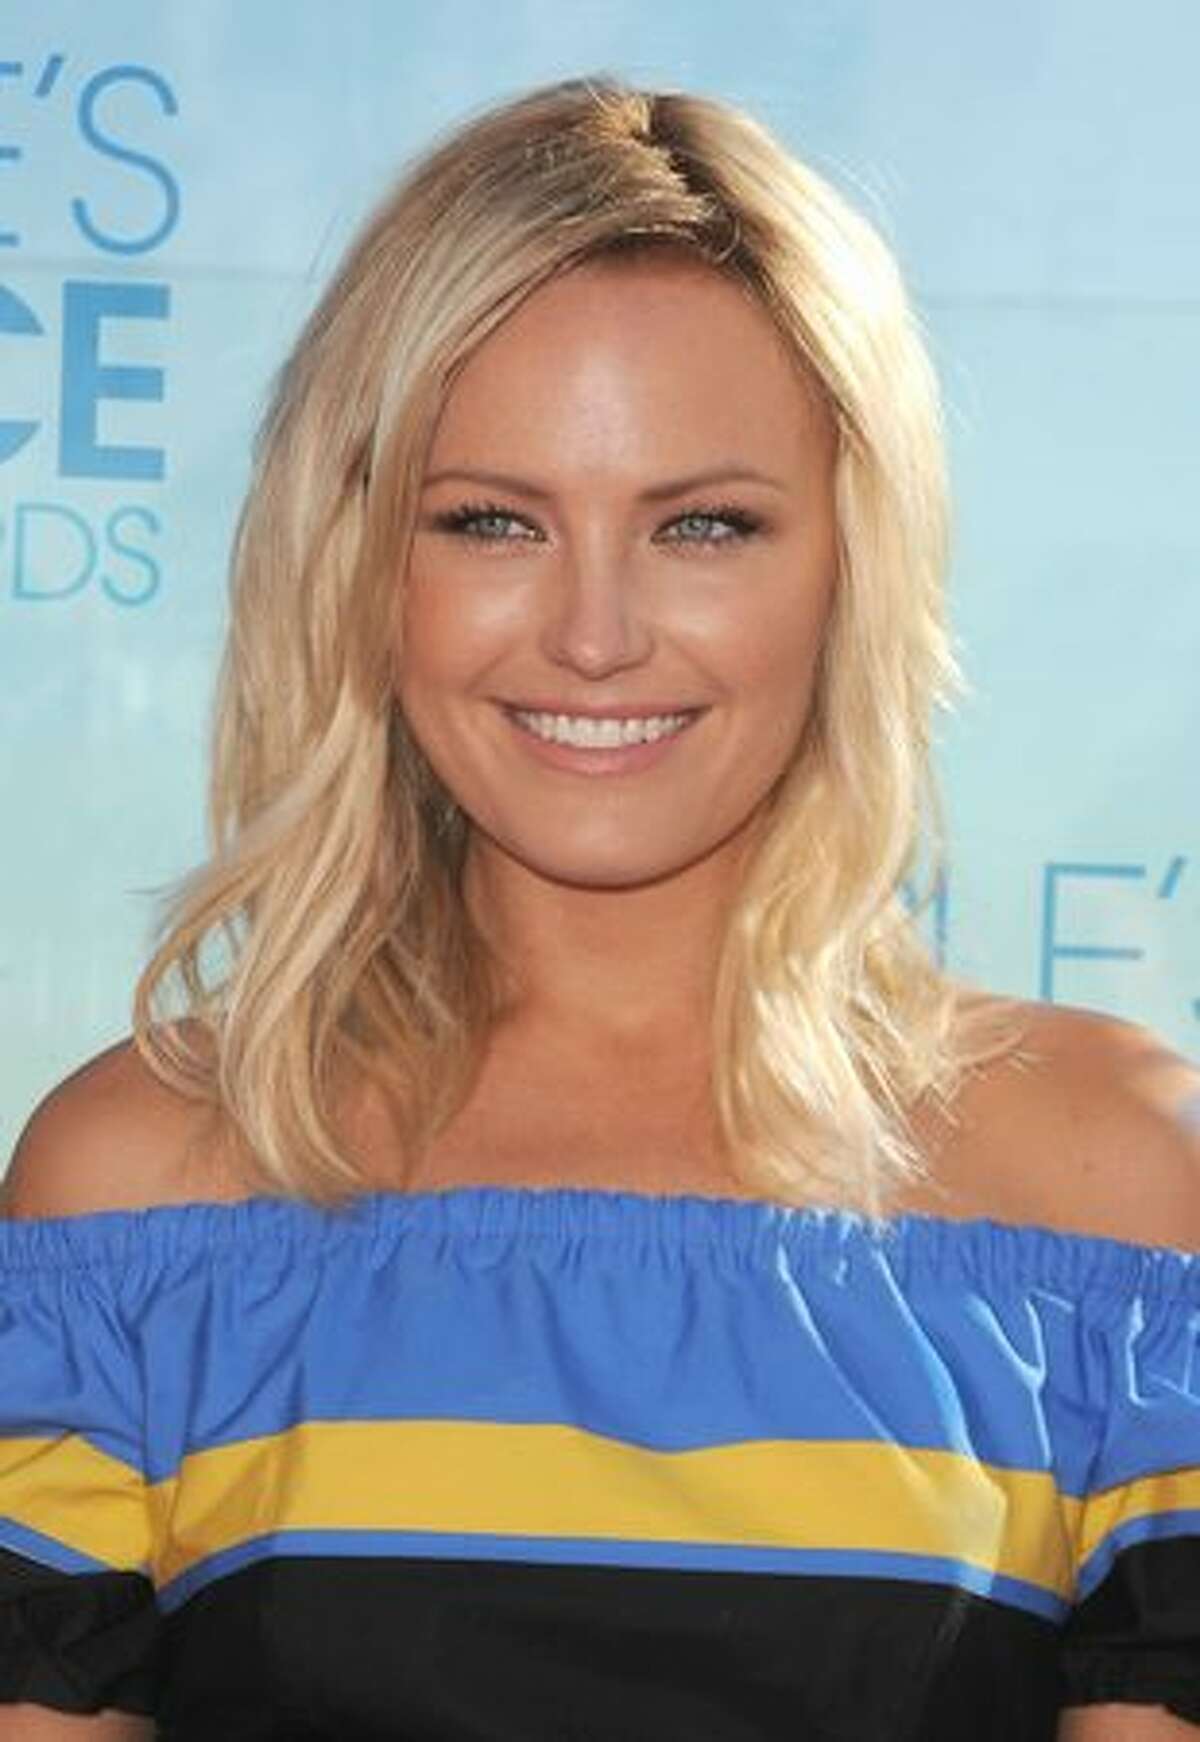 Actress Malin Akerman attends the People's Choice Awards 2011 Press Conference in West Hollywood, California.